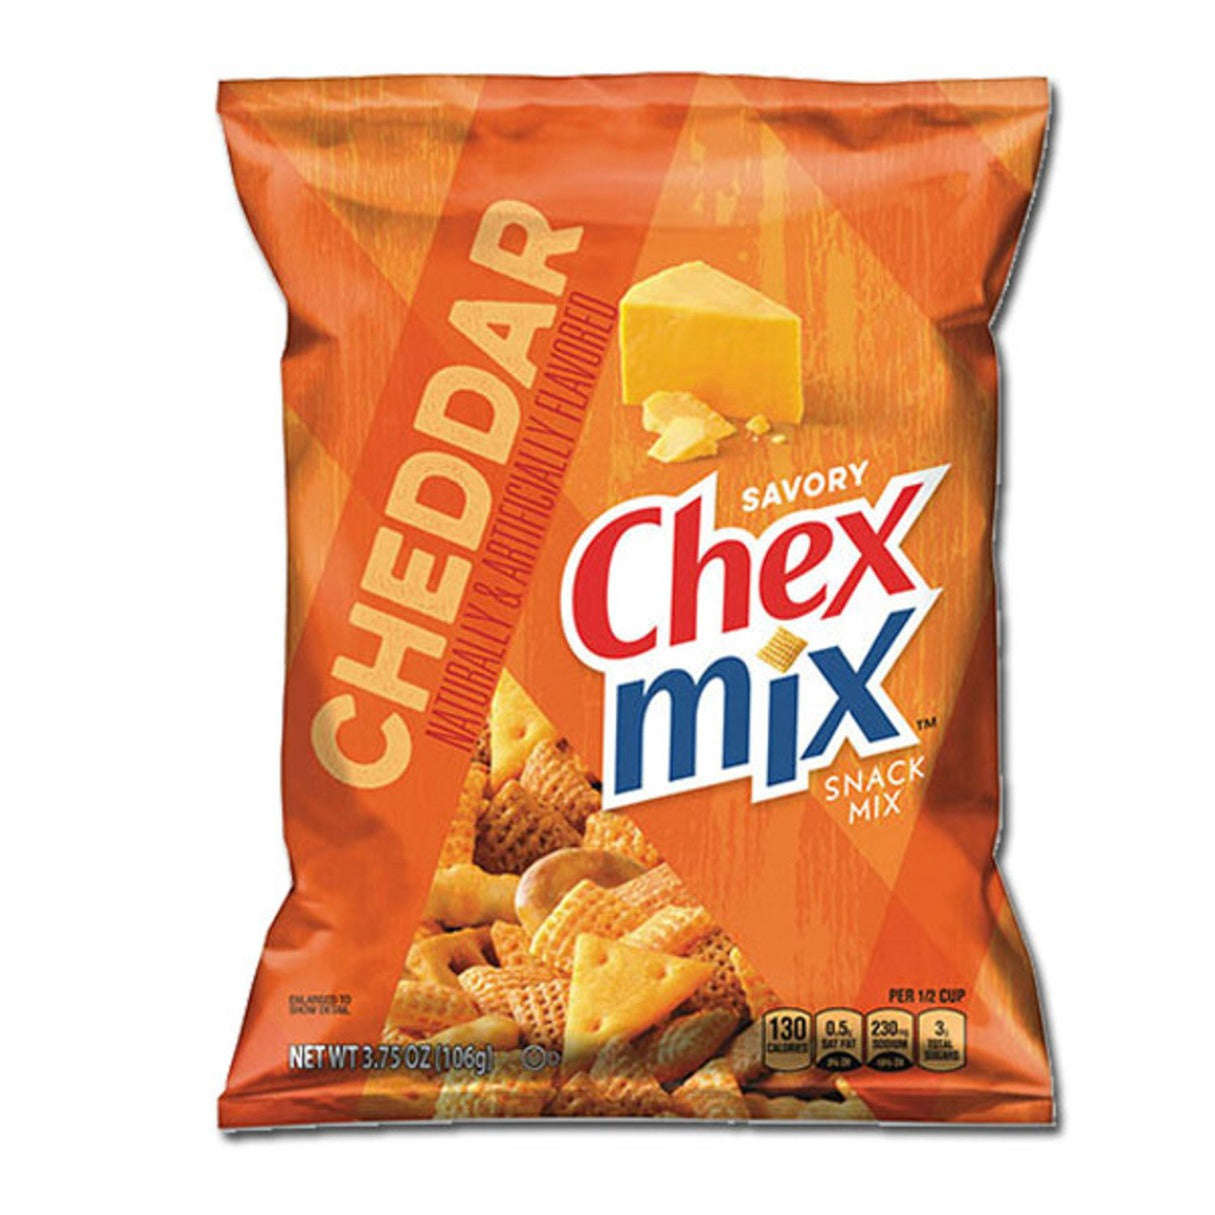 Chex Mix Cheddar Snack Bag 3.75oz -  8ct